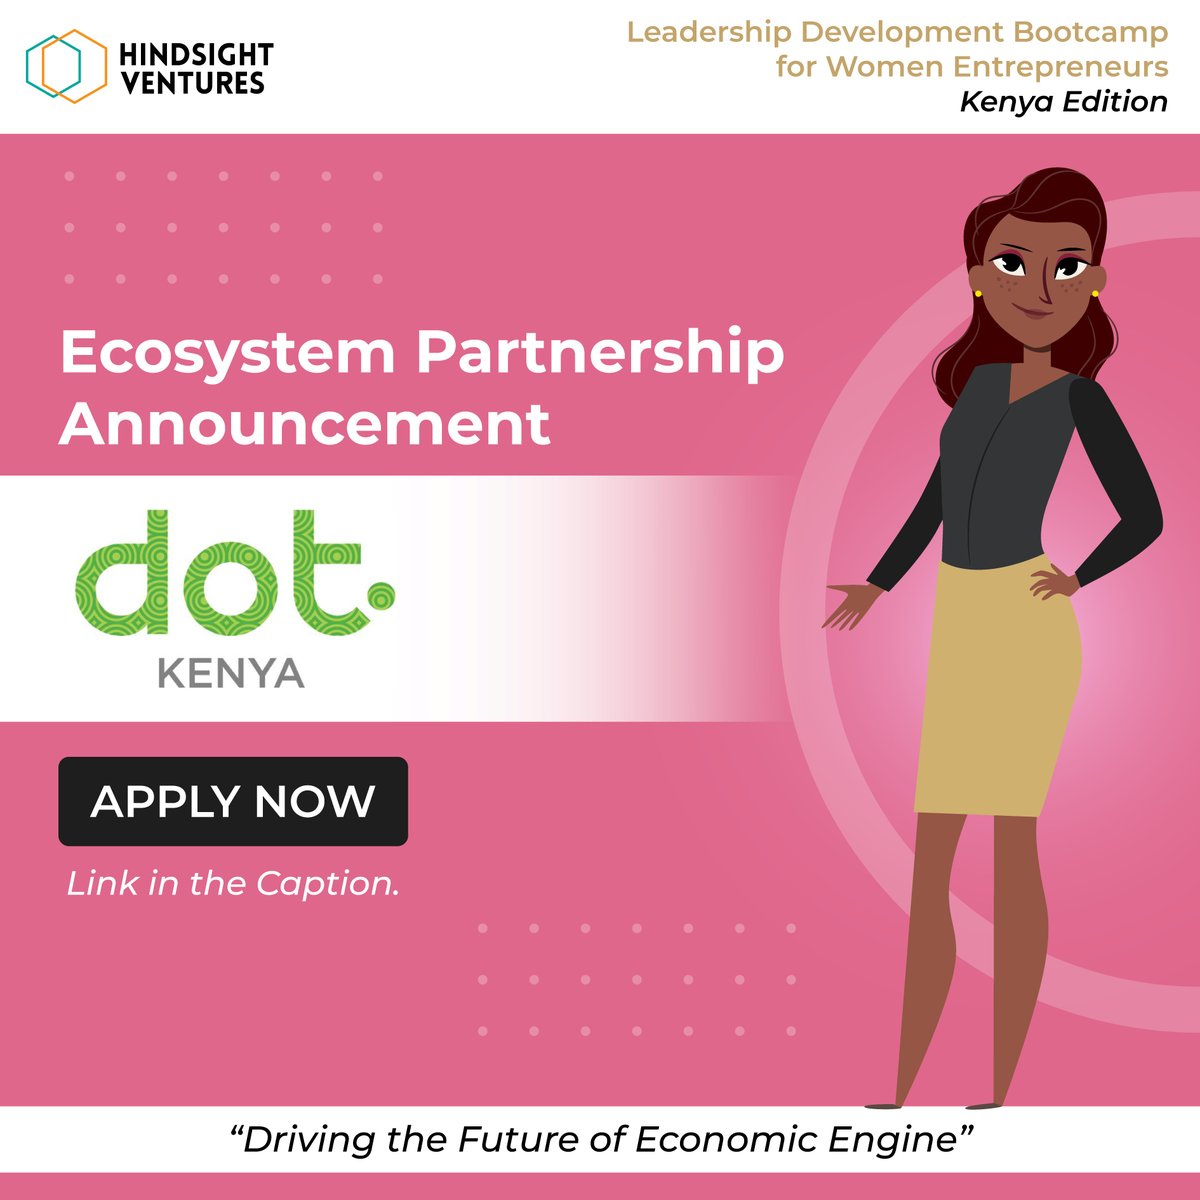 Are you a #WomanEntrepreneur from #Kenya building a #TechStartup or #SMB.

If You answered YES, then here’s something for you!
We are pleased to partner with Hindsight Ventures for their upcoming Leadership Development Bootcamp for Women Entrepreneurs, Kenya Edition.